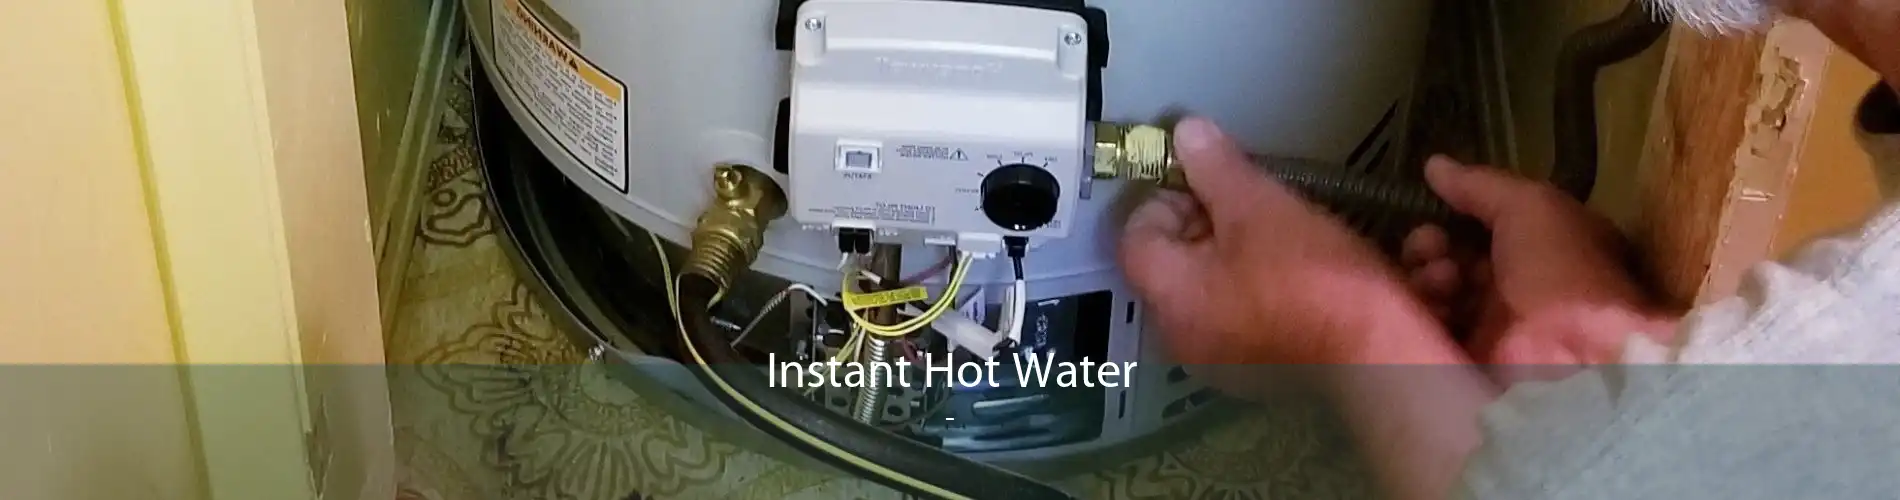 Instant Hot Water  - 